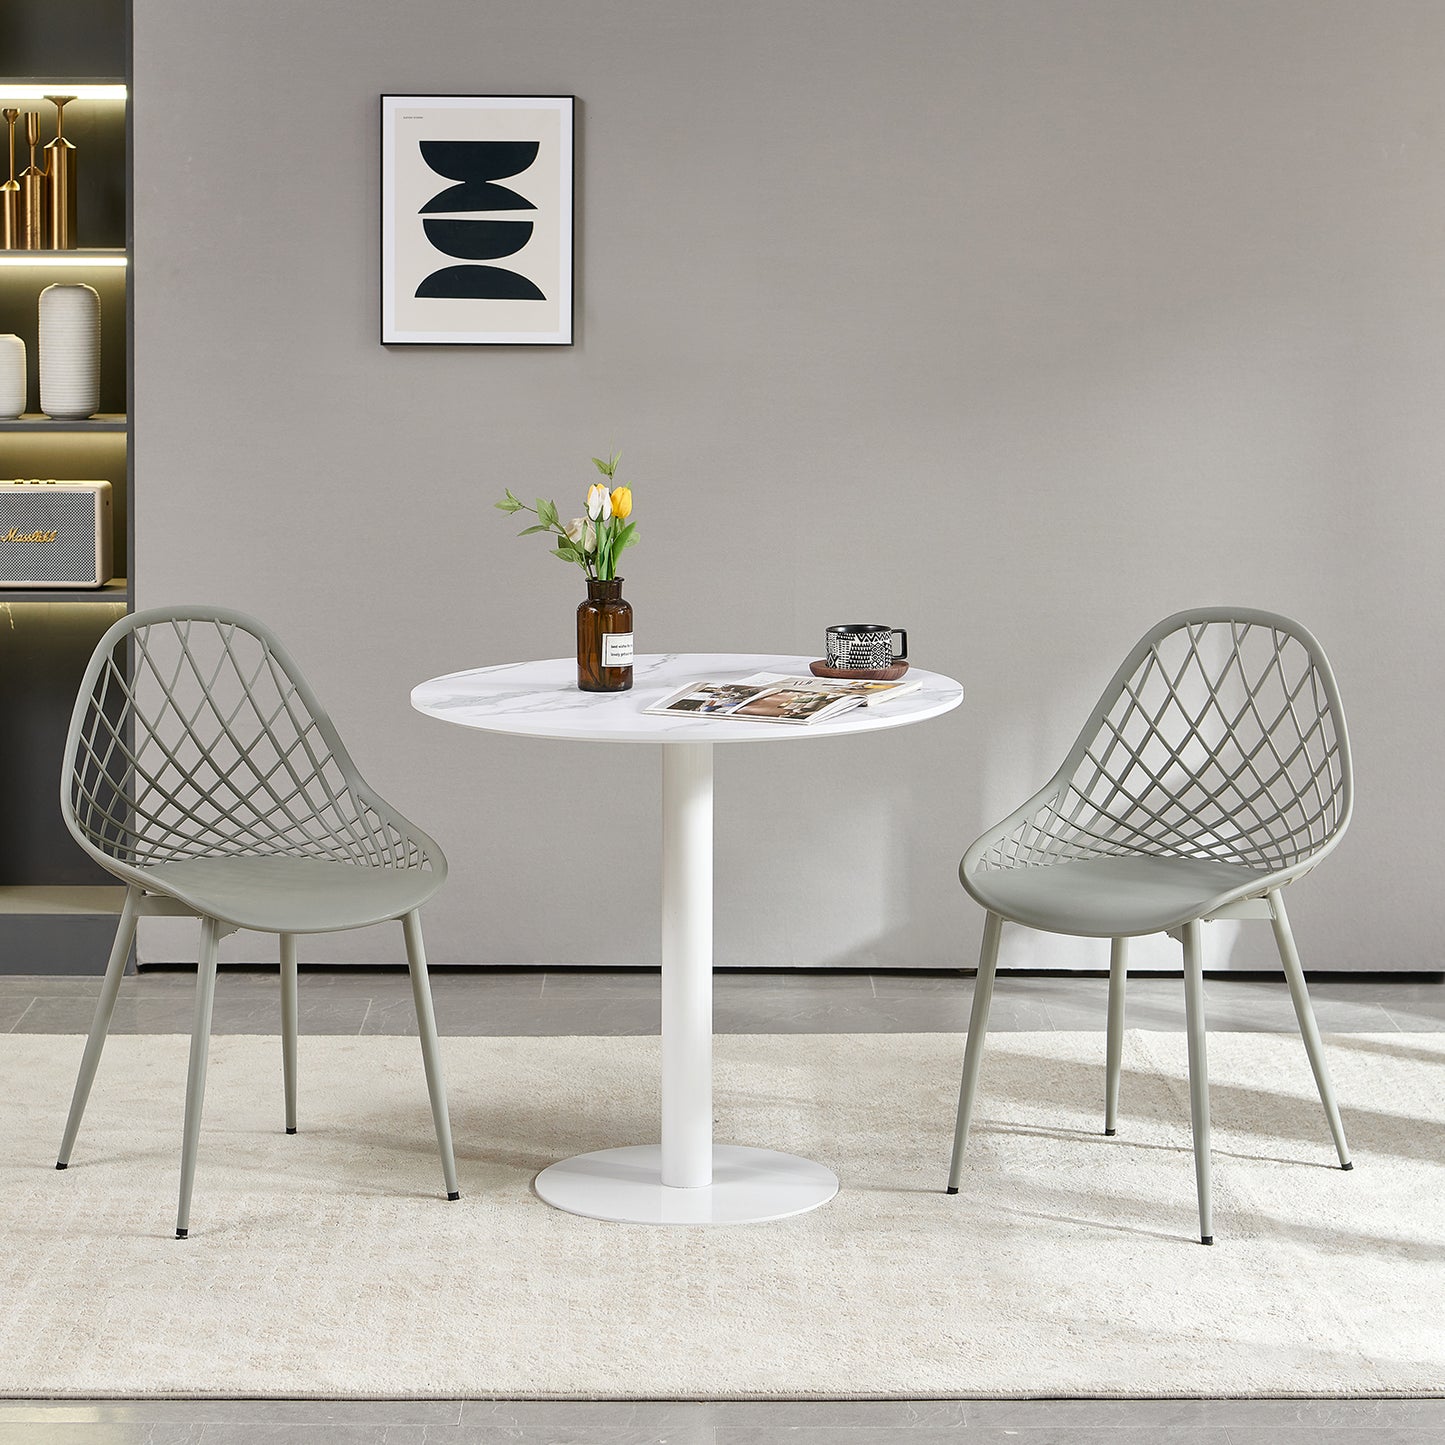 MILAN Hollow Chair with Iron Legs - Gray